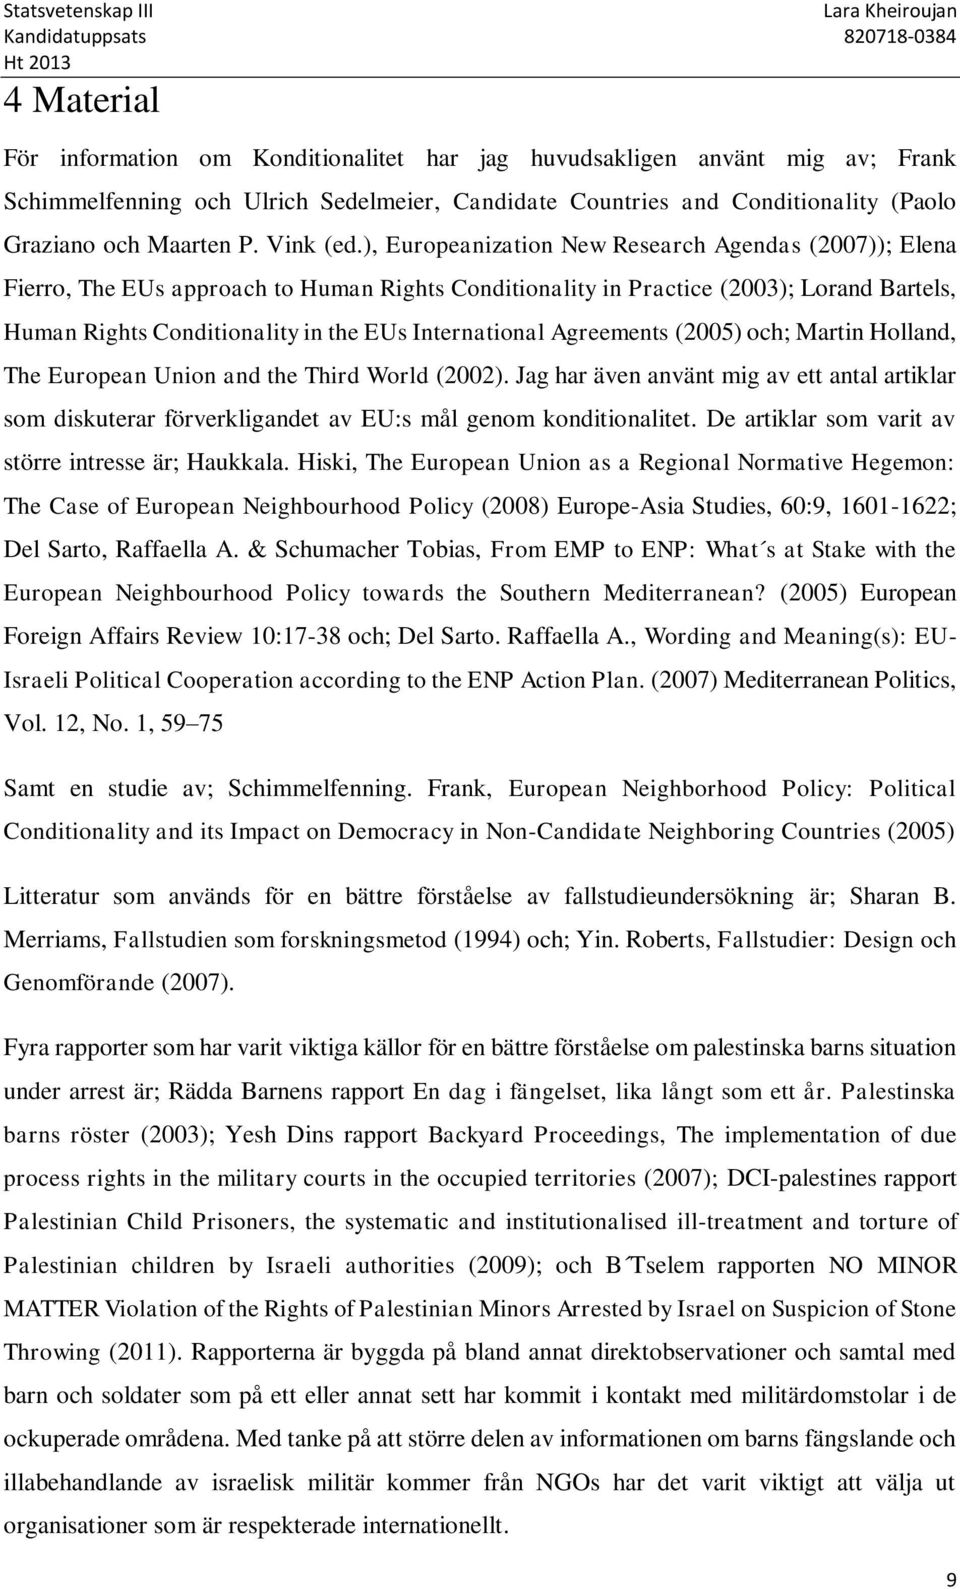 ), Europeanization New Research Agendas (2007)); Elena Fierro, The EUs approach to Human Rights Conditionality in Practice (2003); Lorand Bartels, Human Rights Conditionality in the EUs International